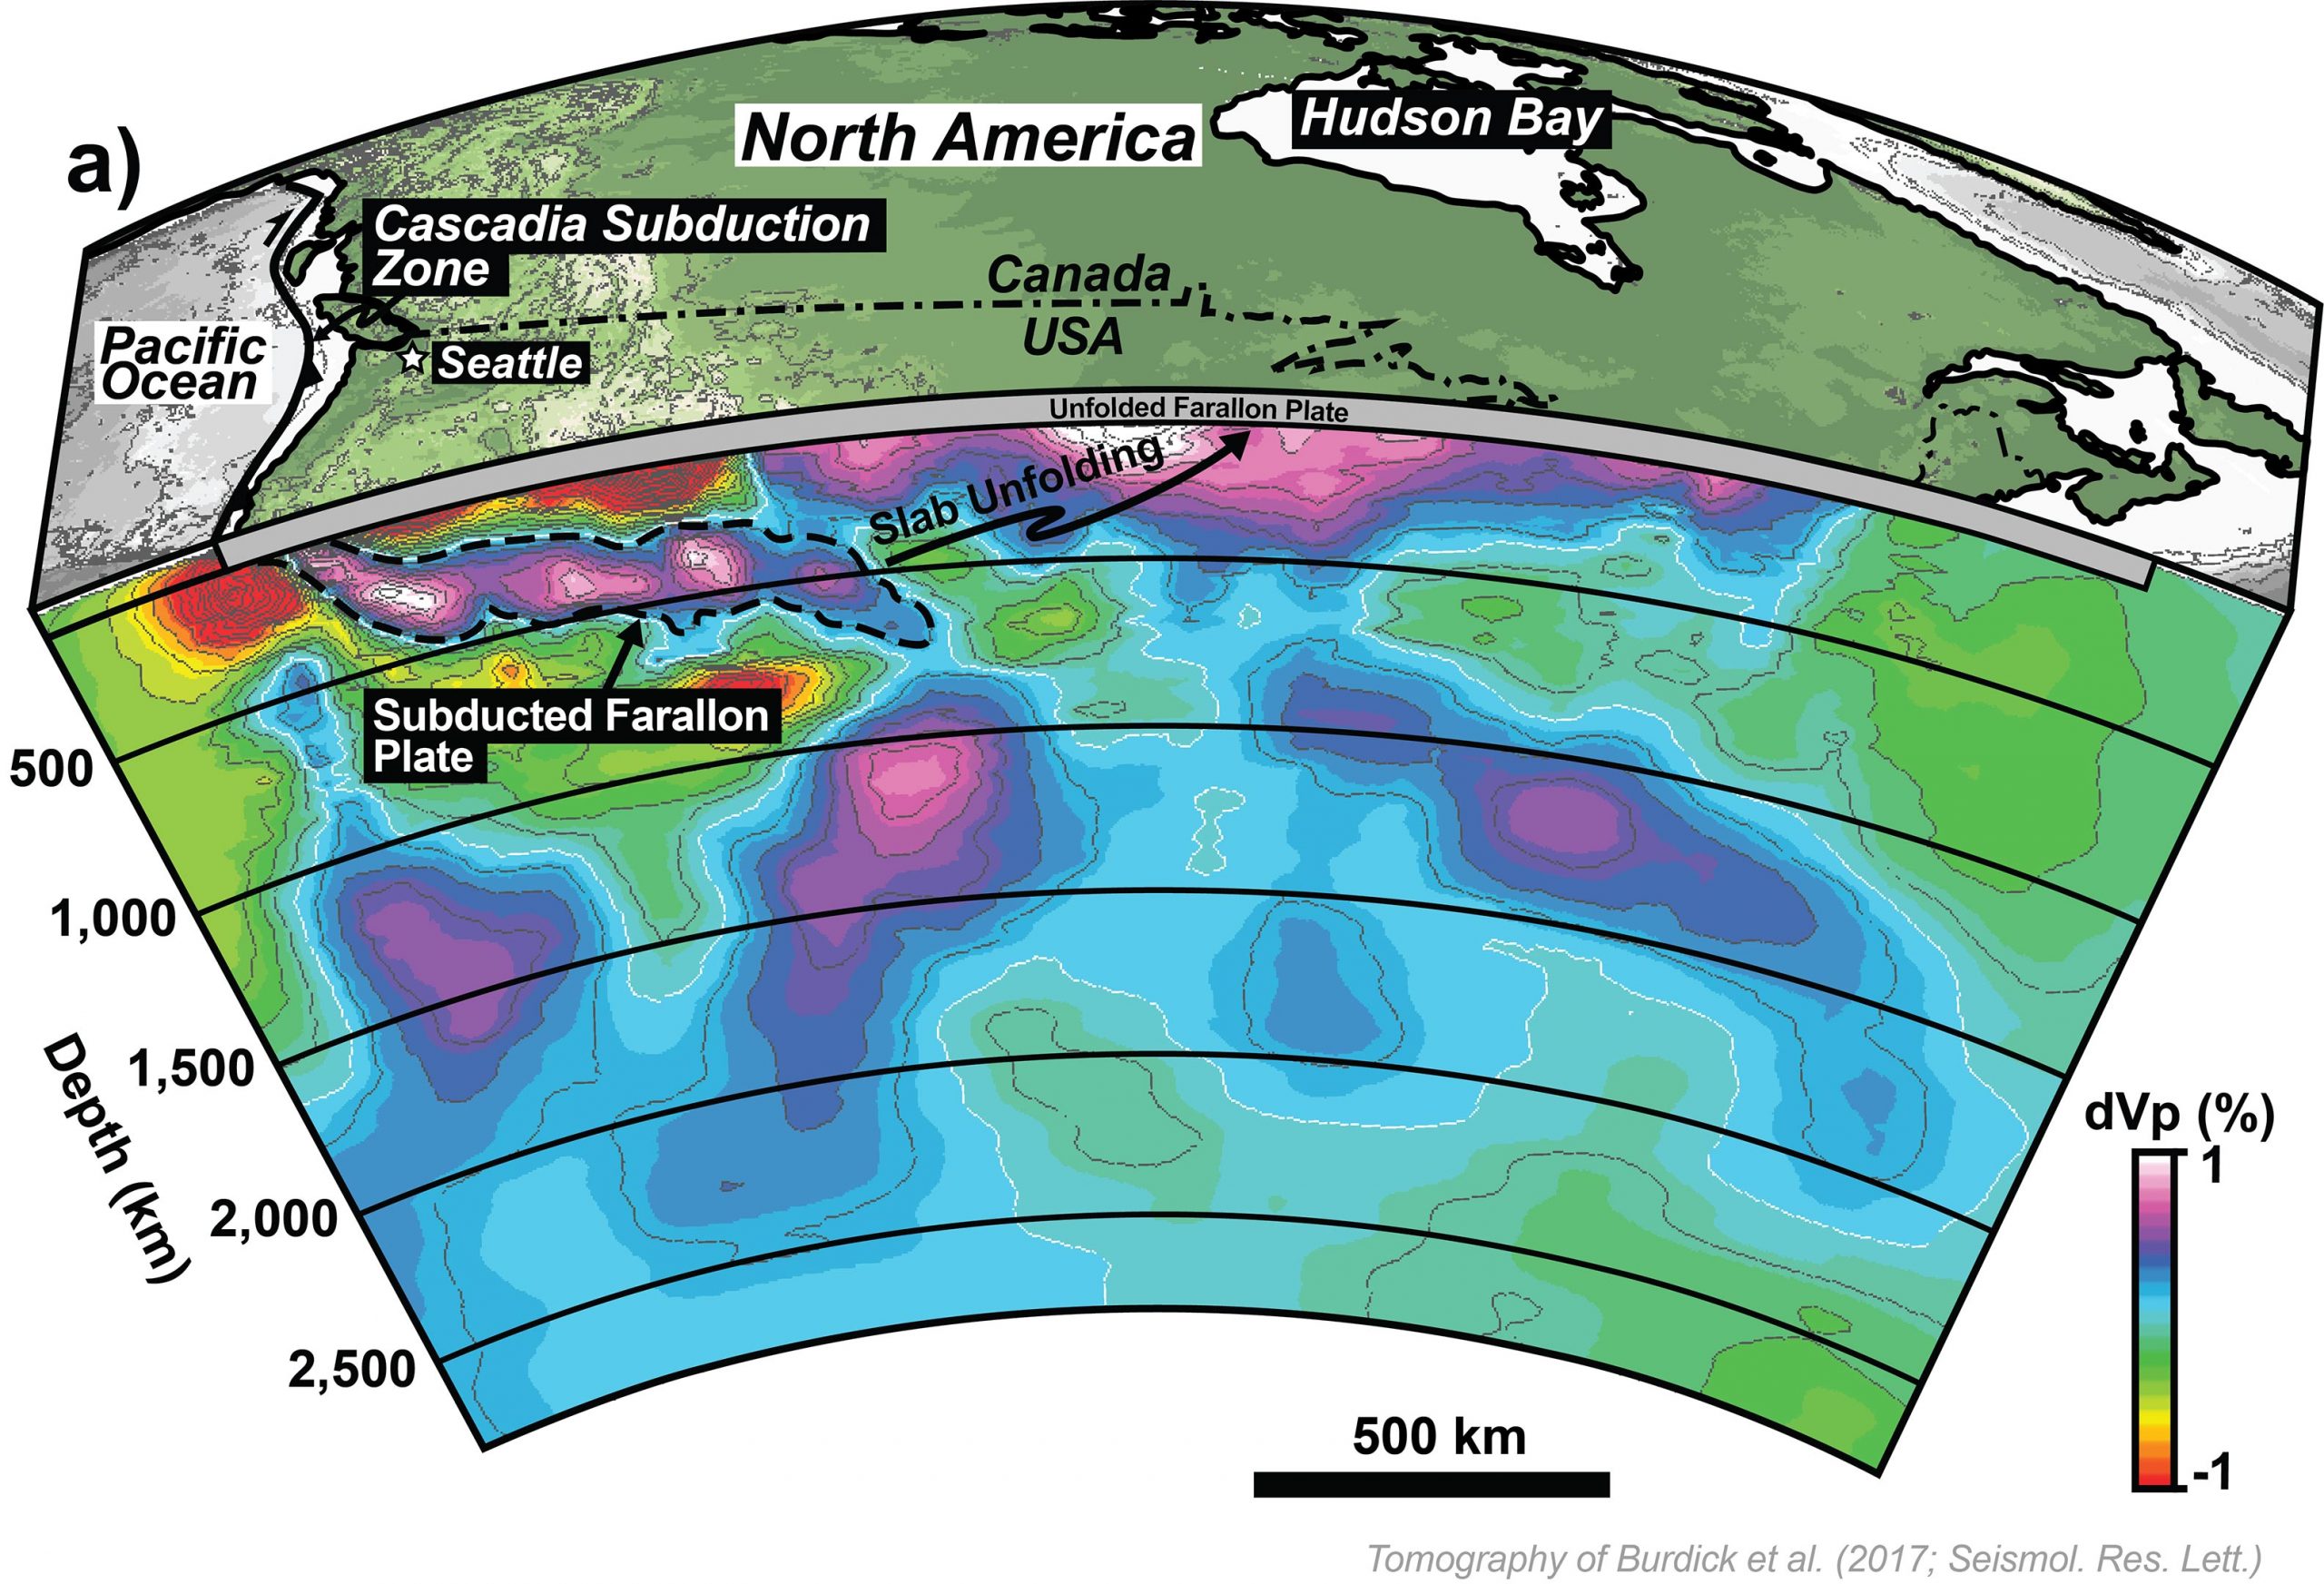 The tectonic plate that some geologists have argued for as a 